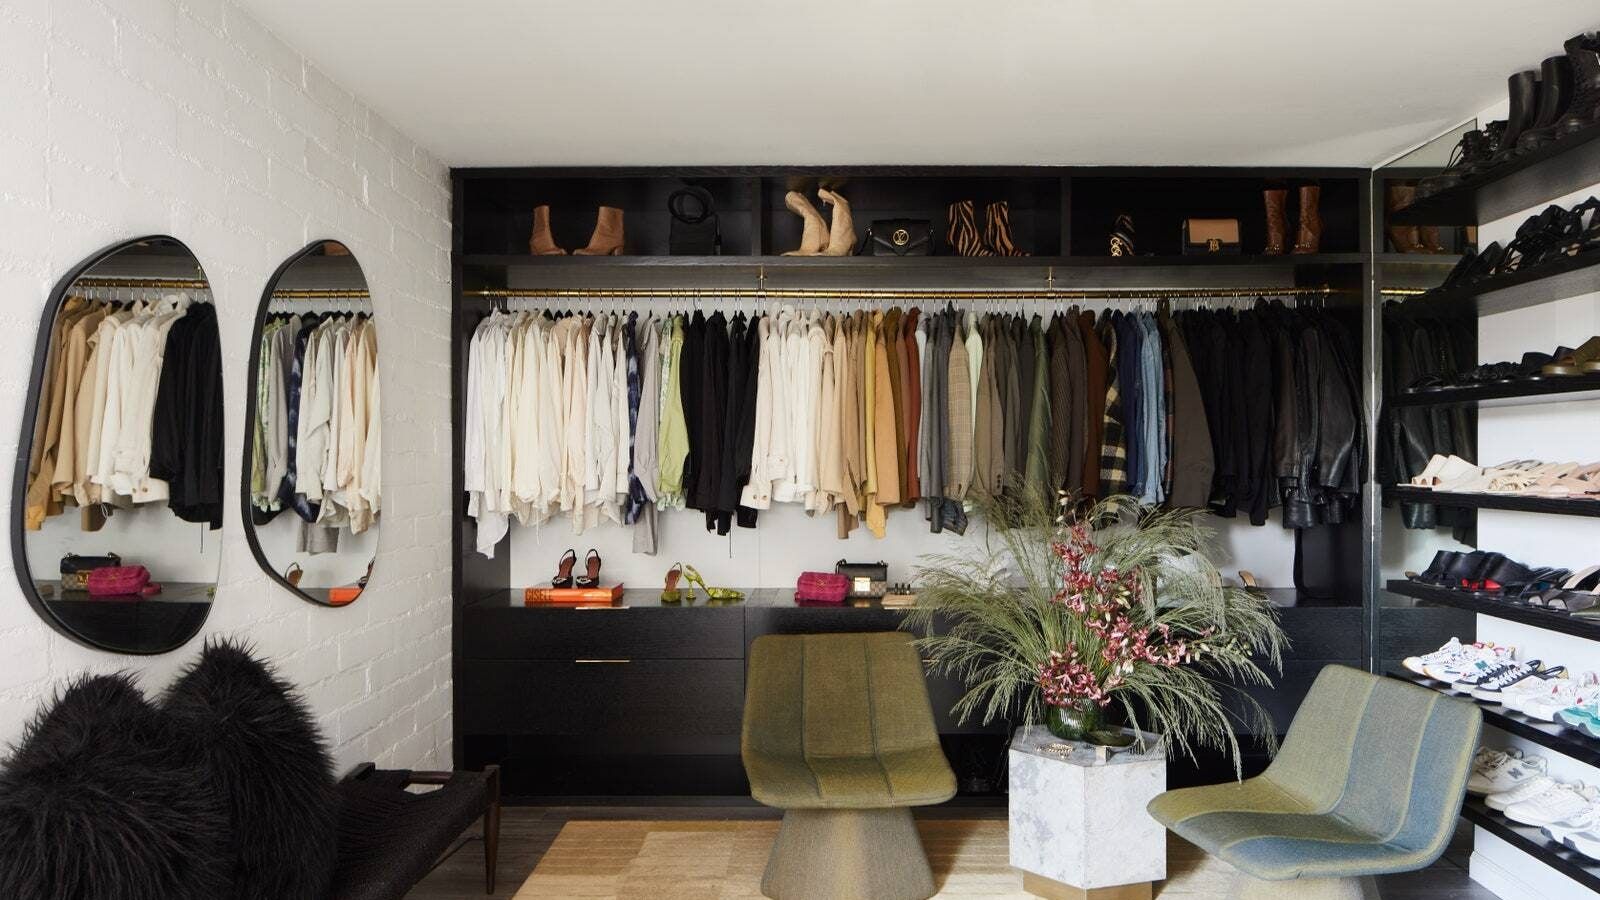 8 Closet Systems That Add Storage Space To Any Home | Architectural Digest  | Architectural Digest In Wardrobes Hangers Storages (View 7 of 15)